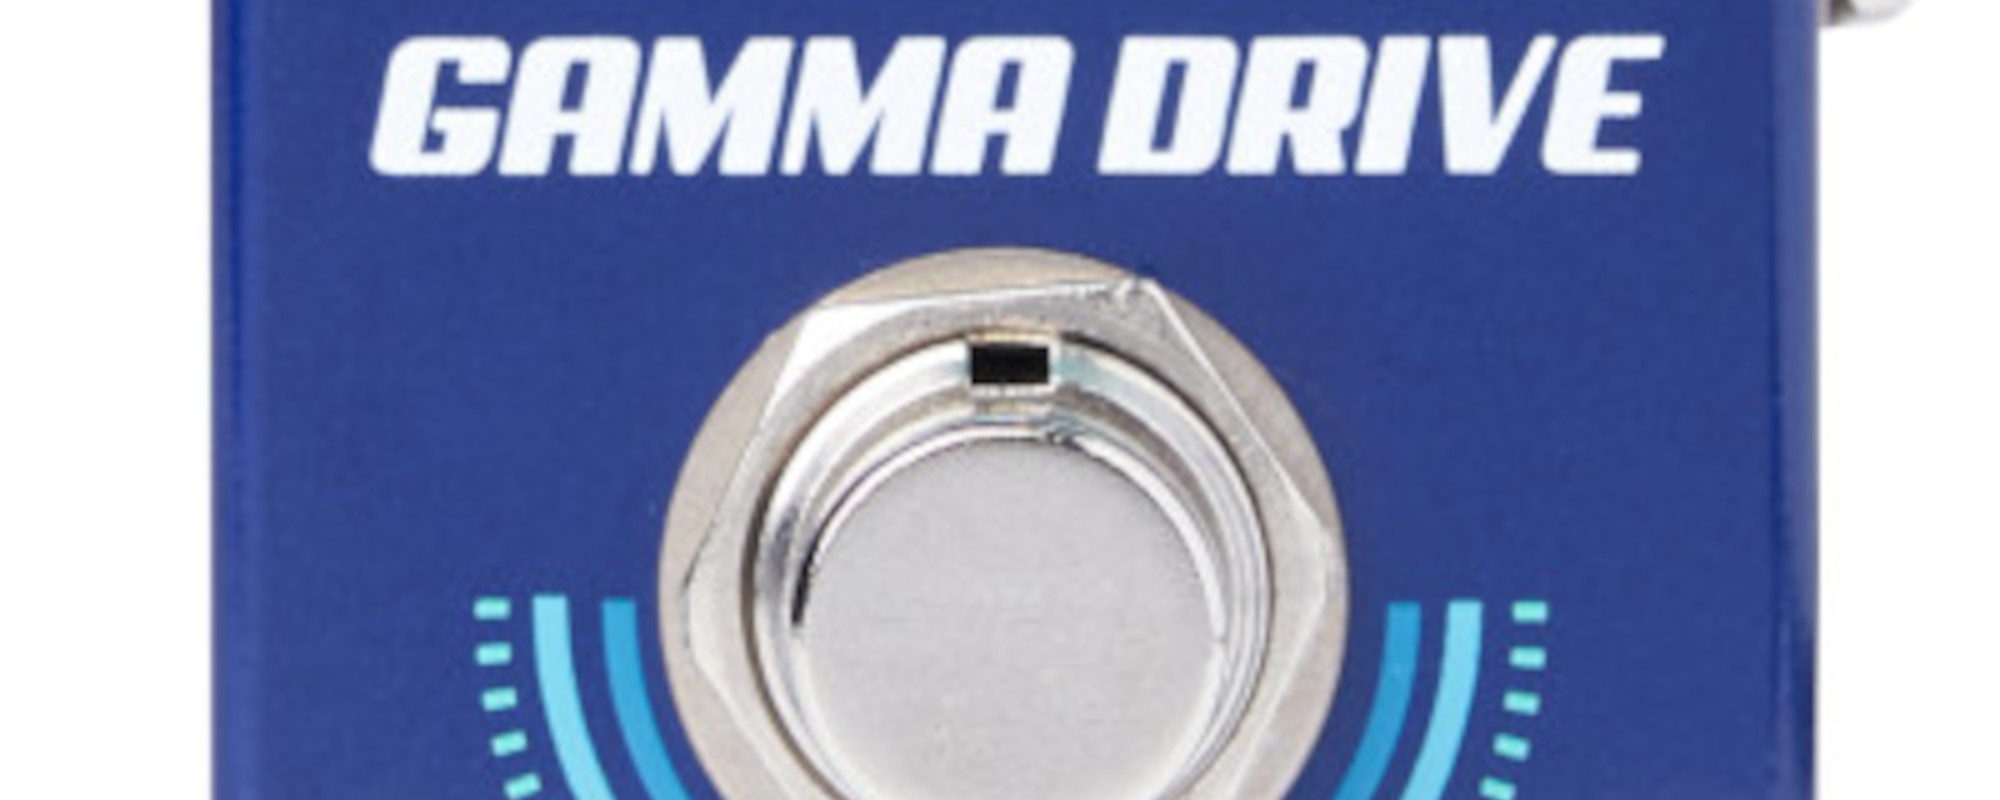 Gear Review: Gamma Drive by Pigtronix